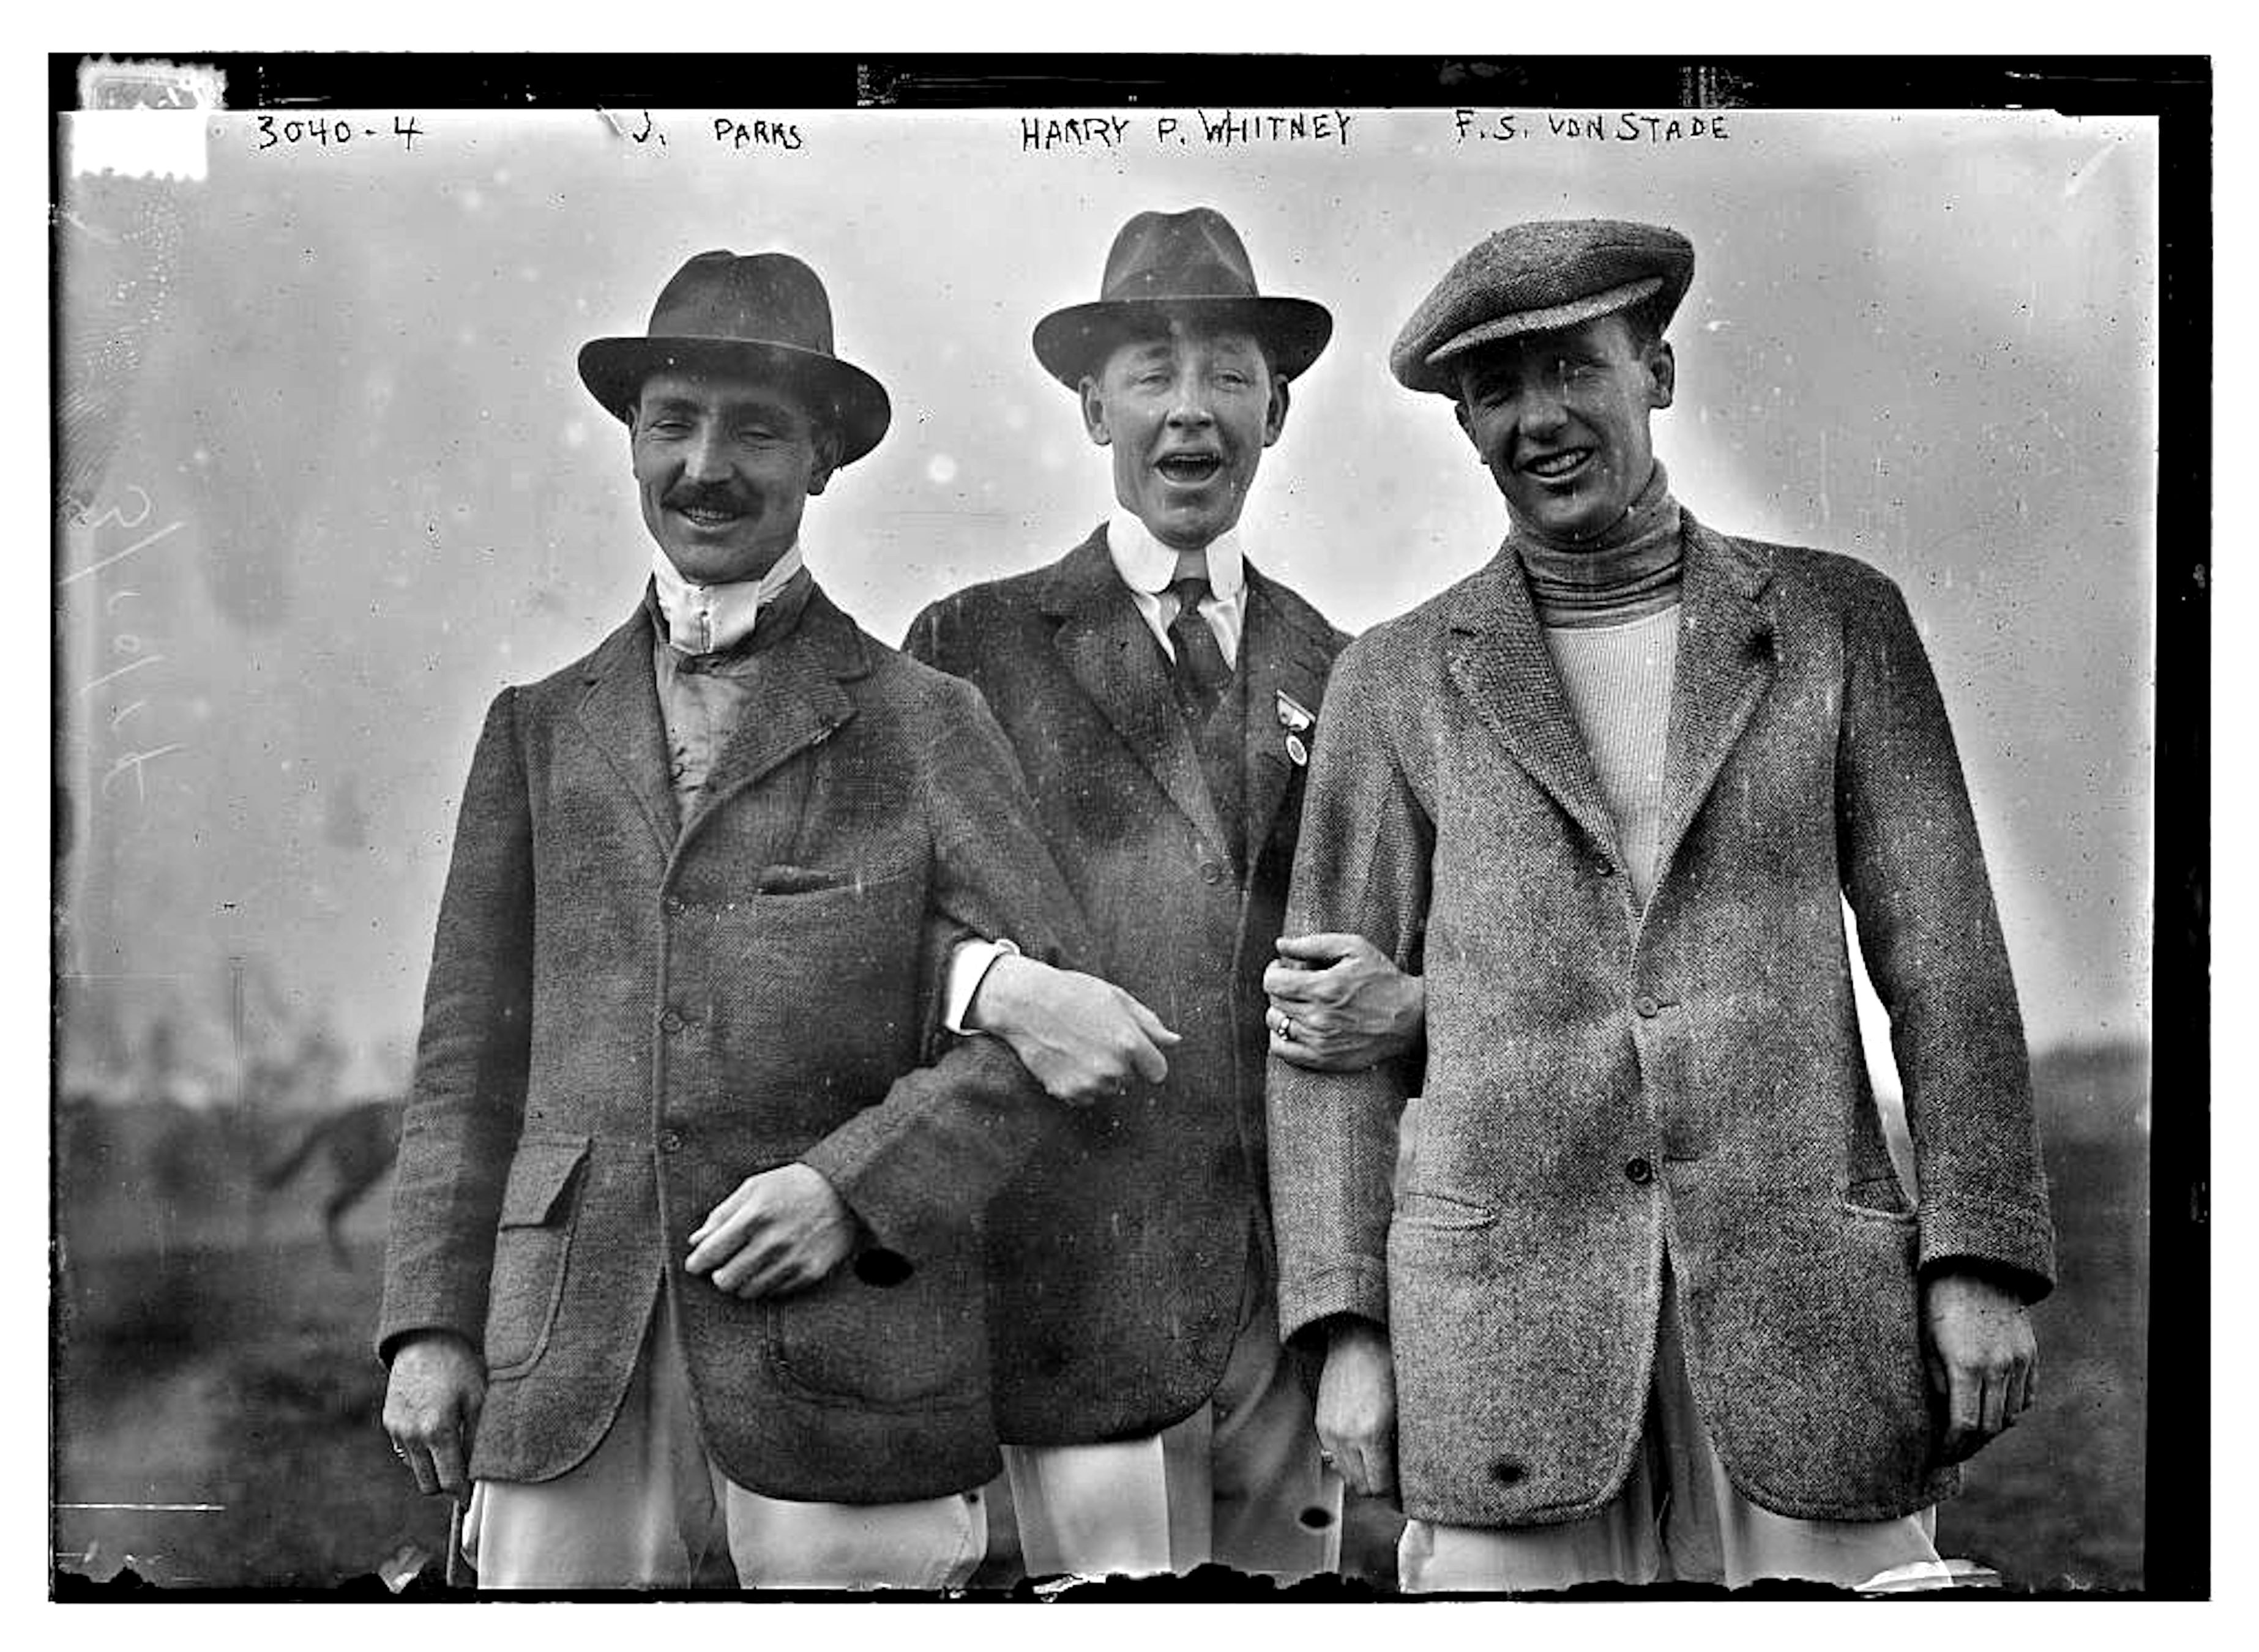 J. Parks, Harry Payne Whintey, and F. "Skiddy" von Stade, c. 1910 (Library of Congress, Prints & Photographs Division, [LC-DIG-ggbain-15888])